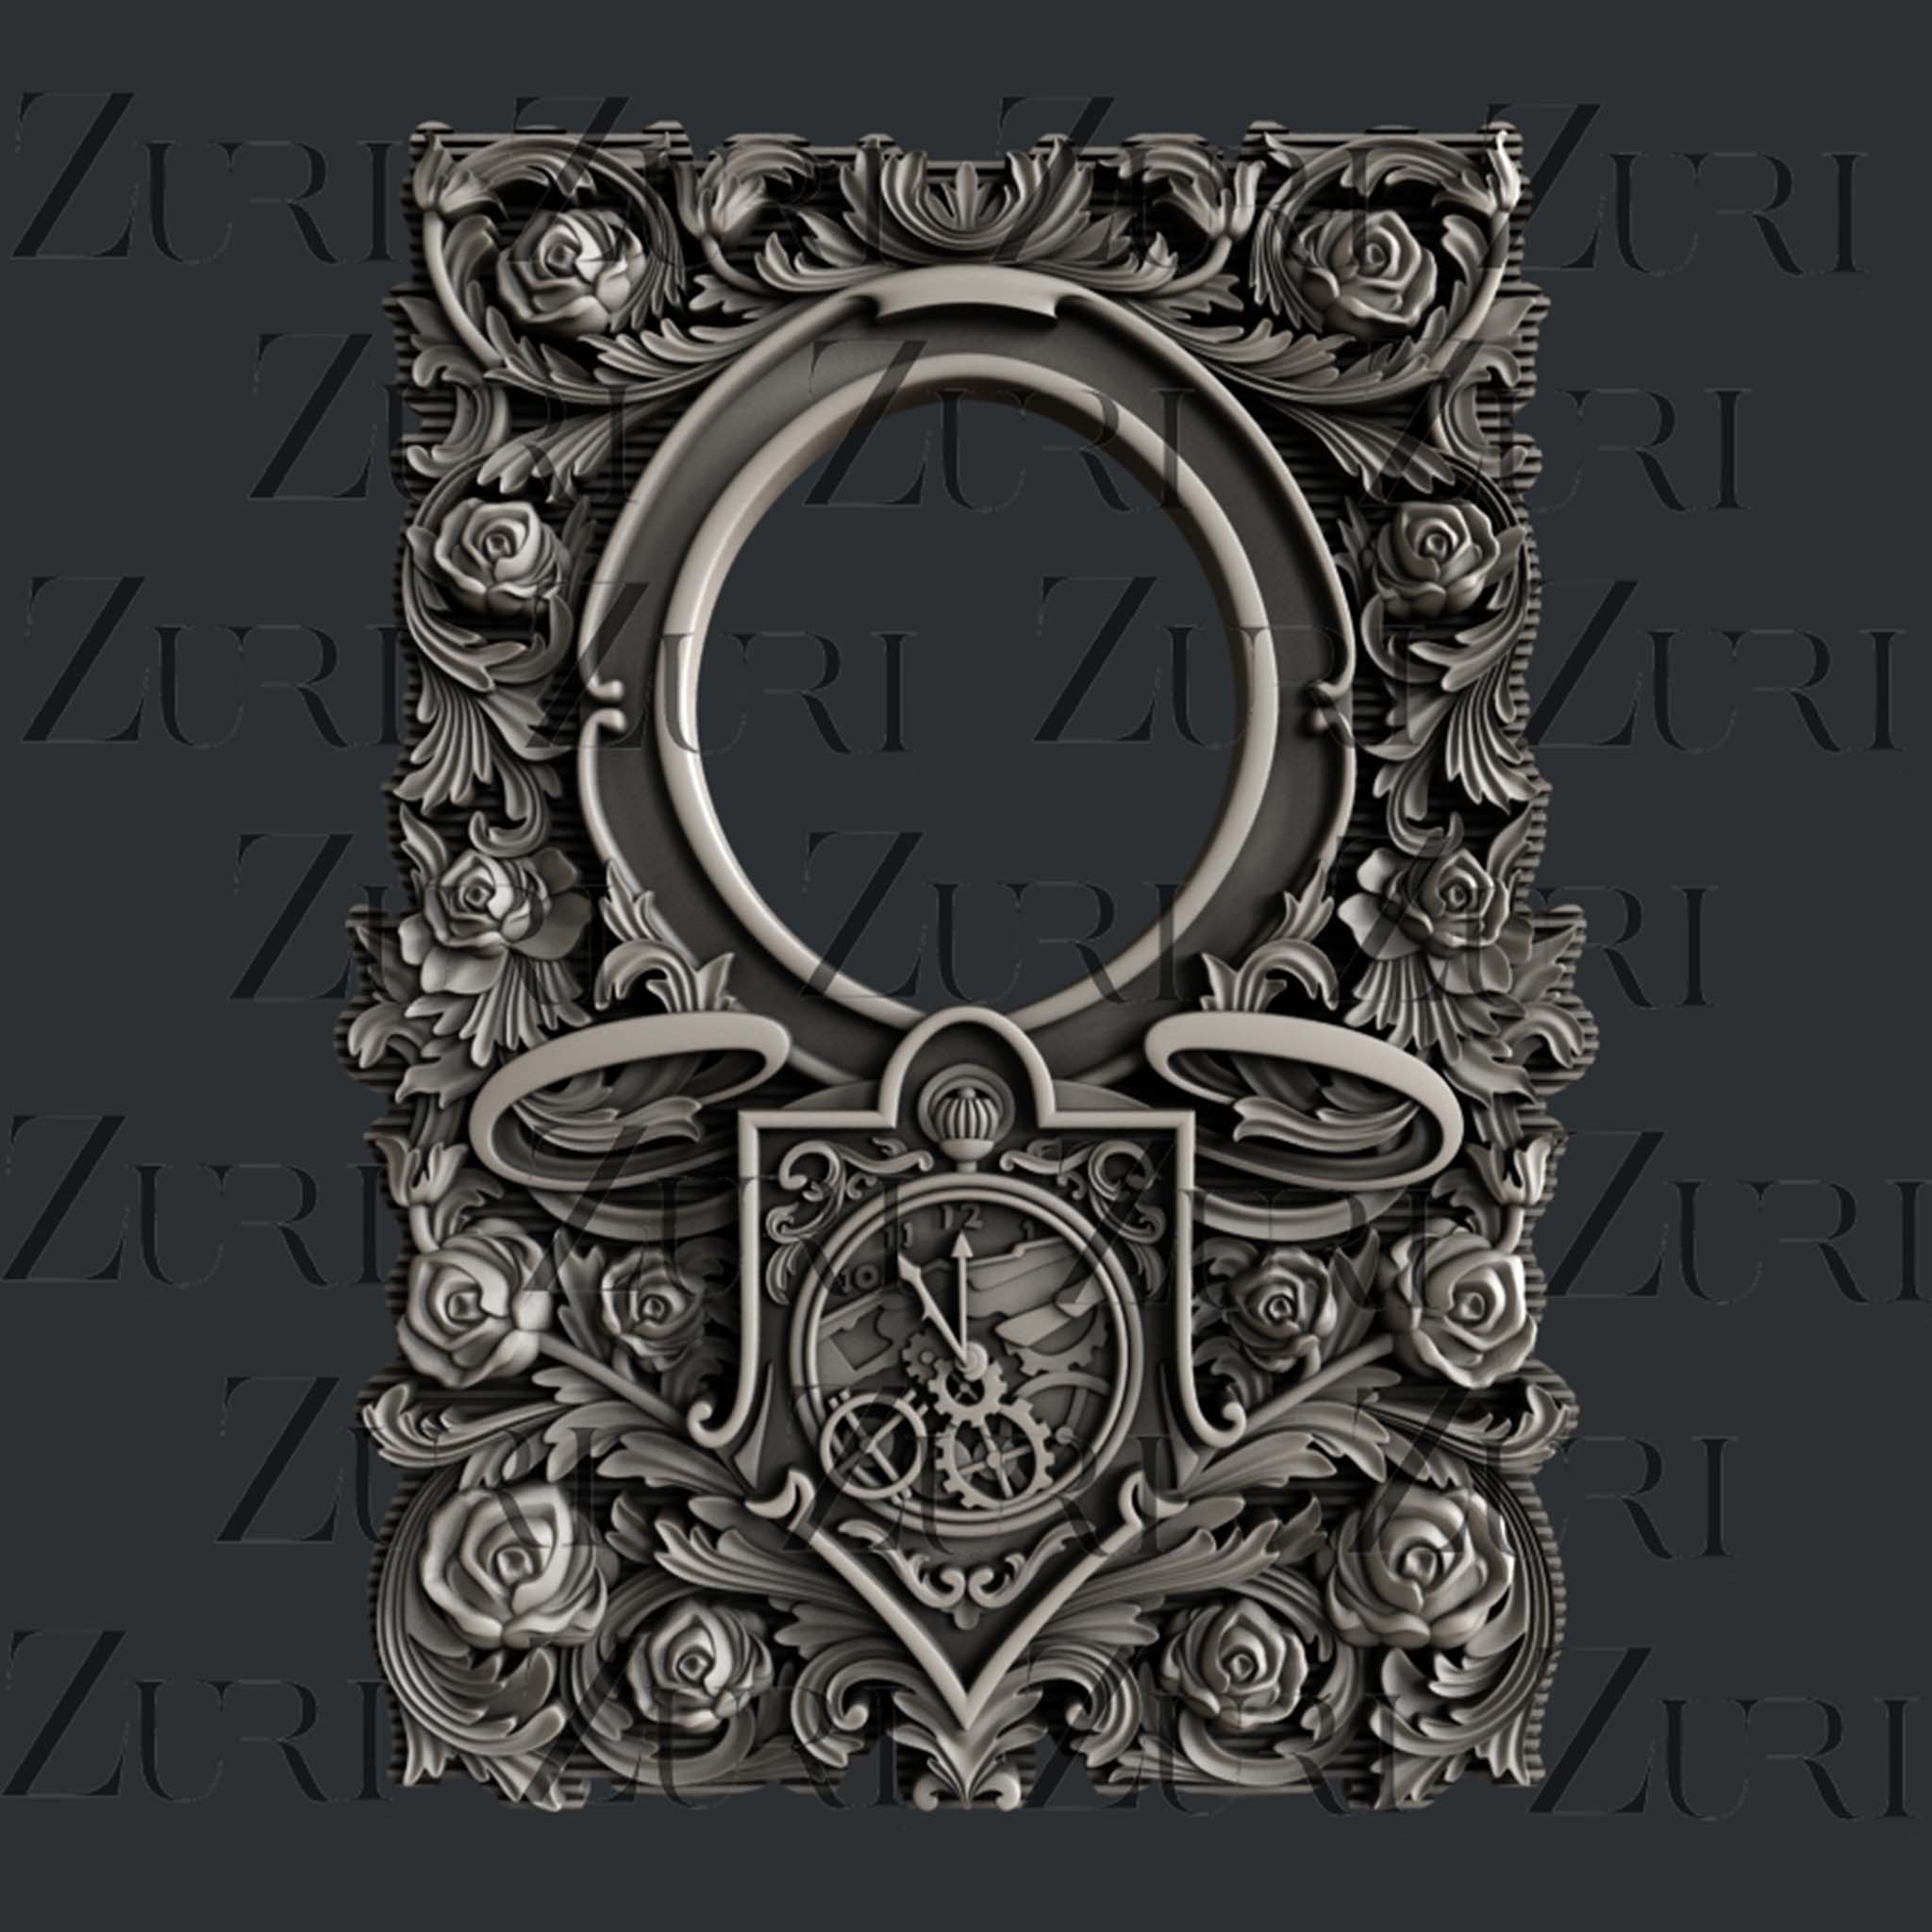 A grey casting of an Alice in Wonderland inspired frame with roses and a pocket watch on it.A grey silicone mold casting of an Alice in Wonderland inspired frame with roses and a pocket watch is on a dark grey background and covered with Zuri watermarks.